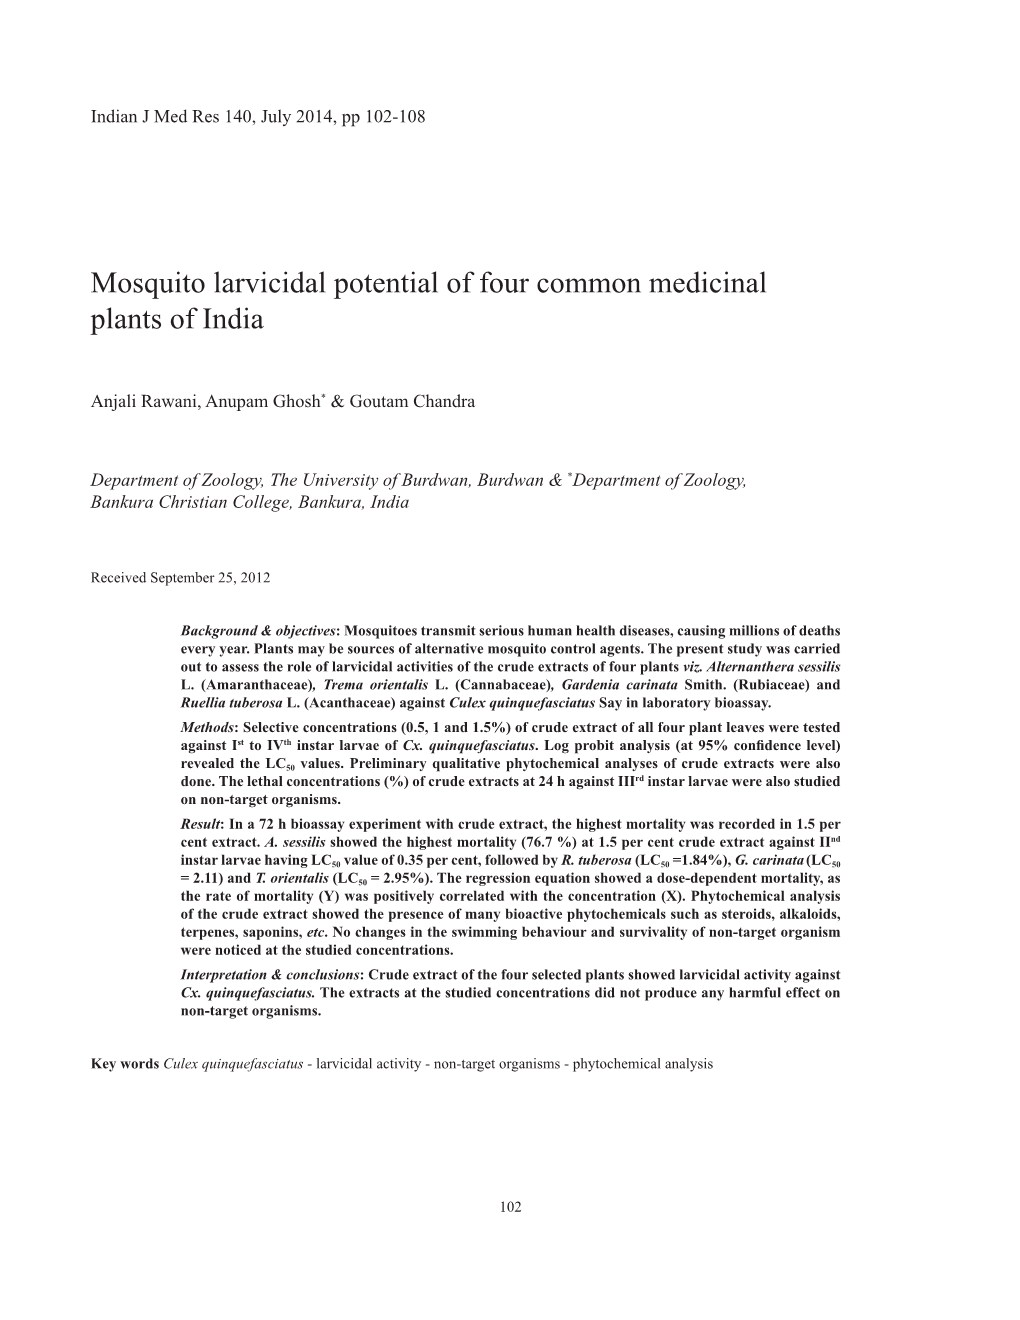 Mosquito Larvicidal Potential of Four Common Medicinal Plants of India